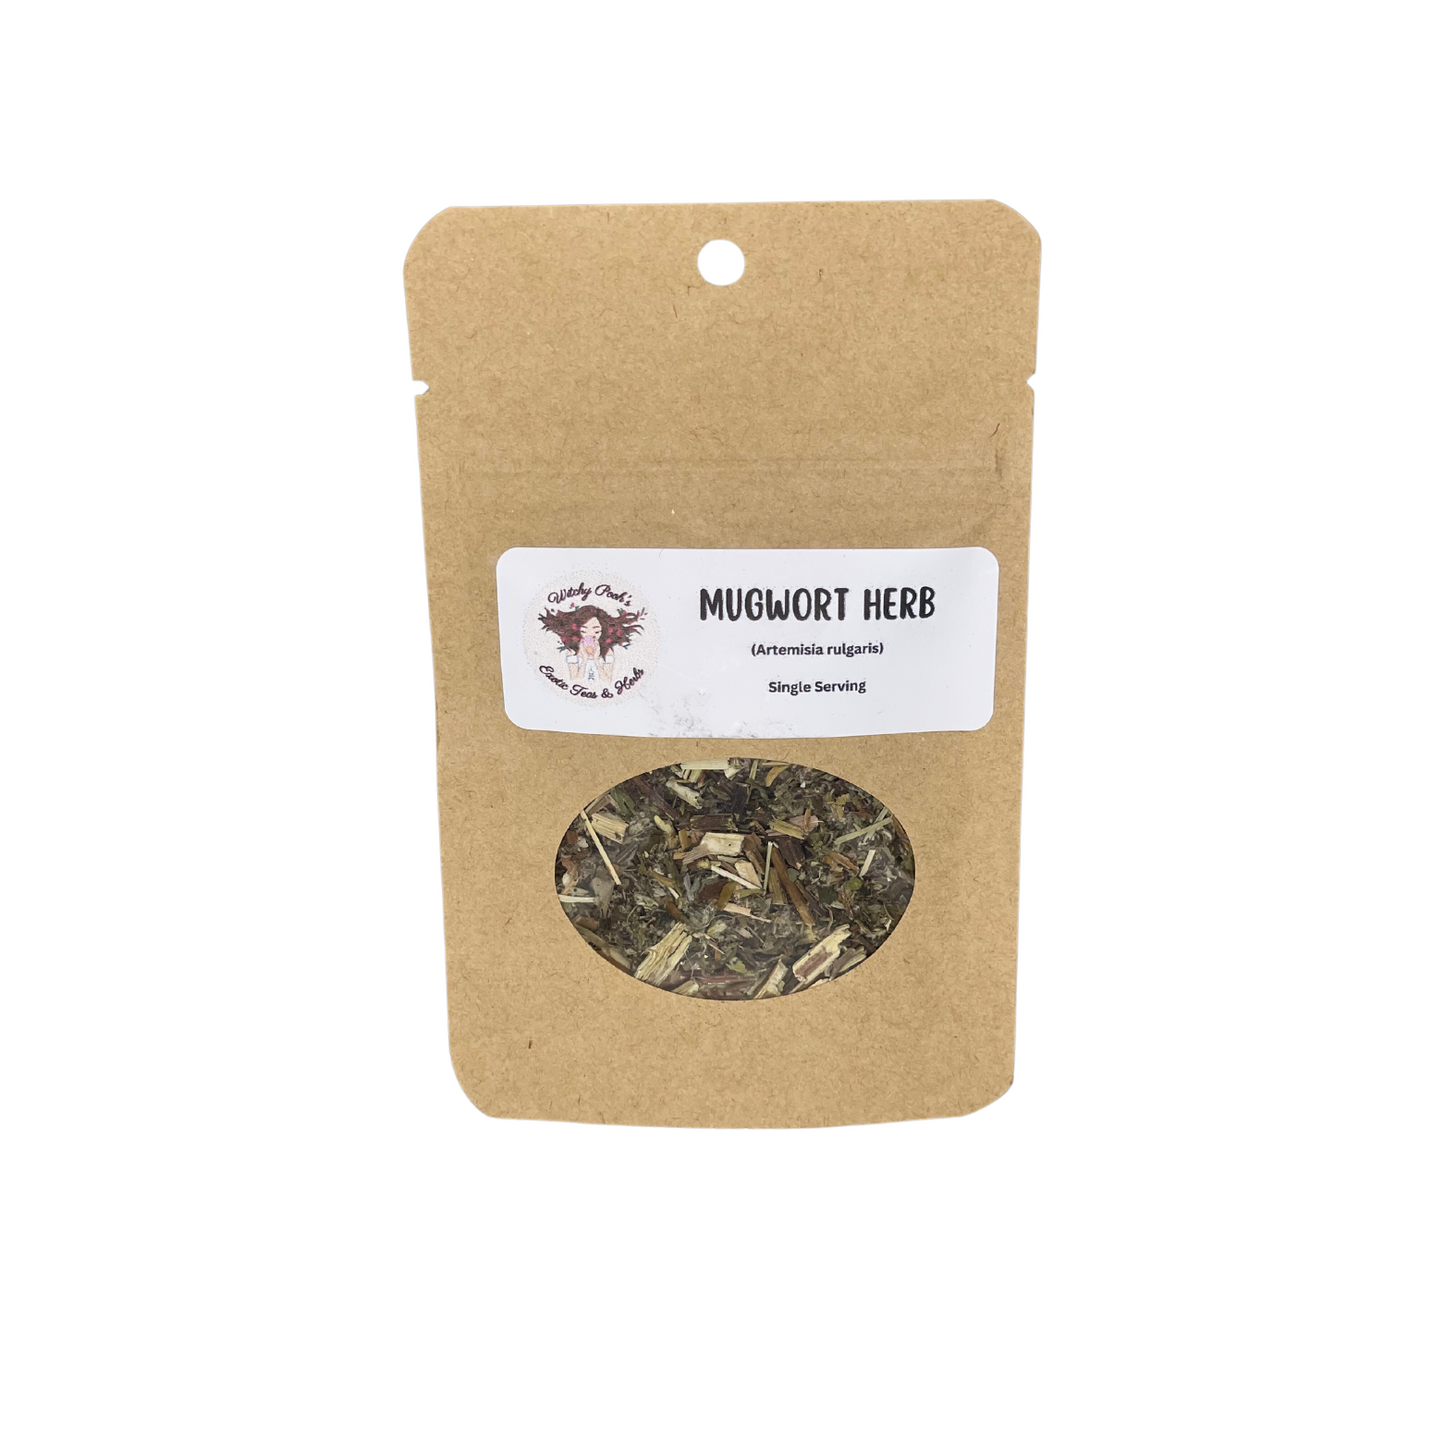 Witchy Pooh's Mugwort Herb For Ceremonial Practice Smudging Vivid Meditation to Connect with the Ancestors